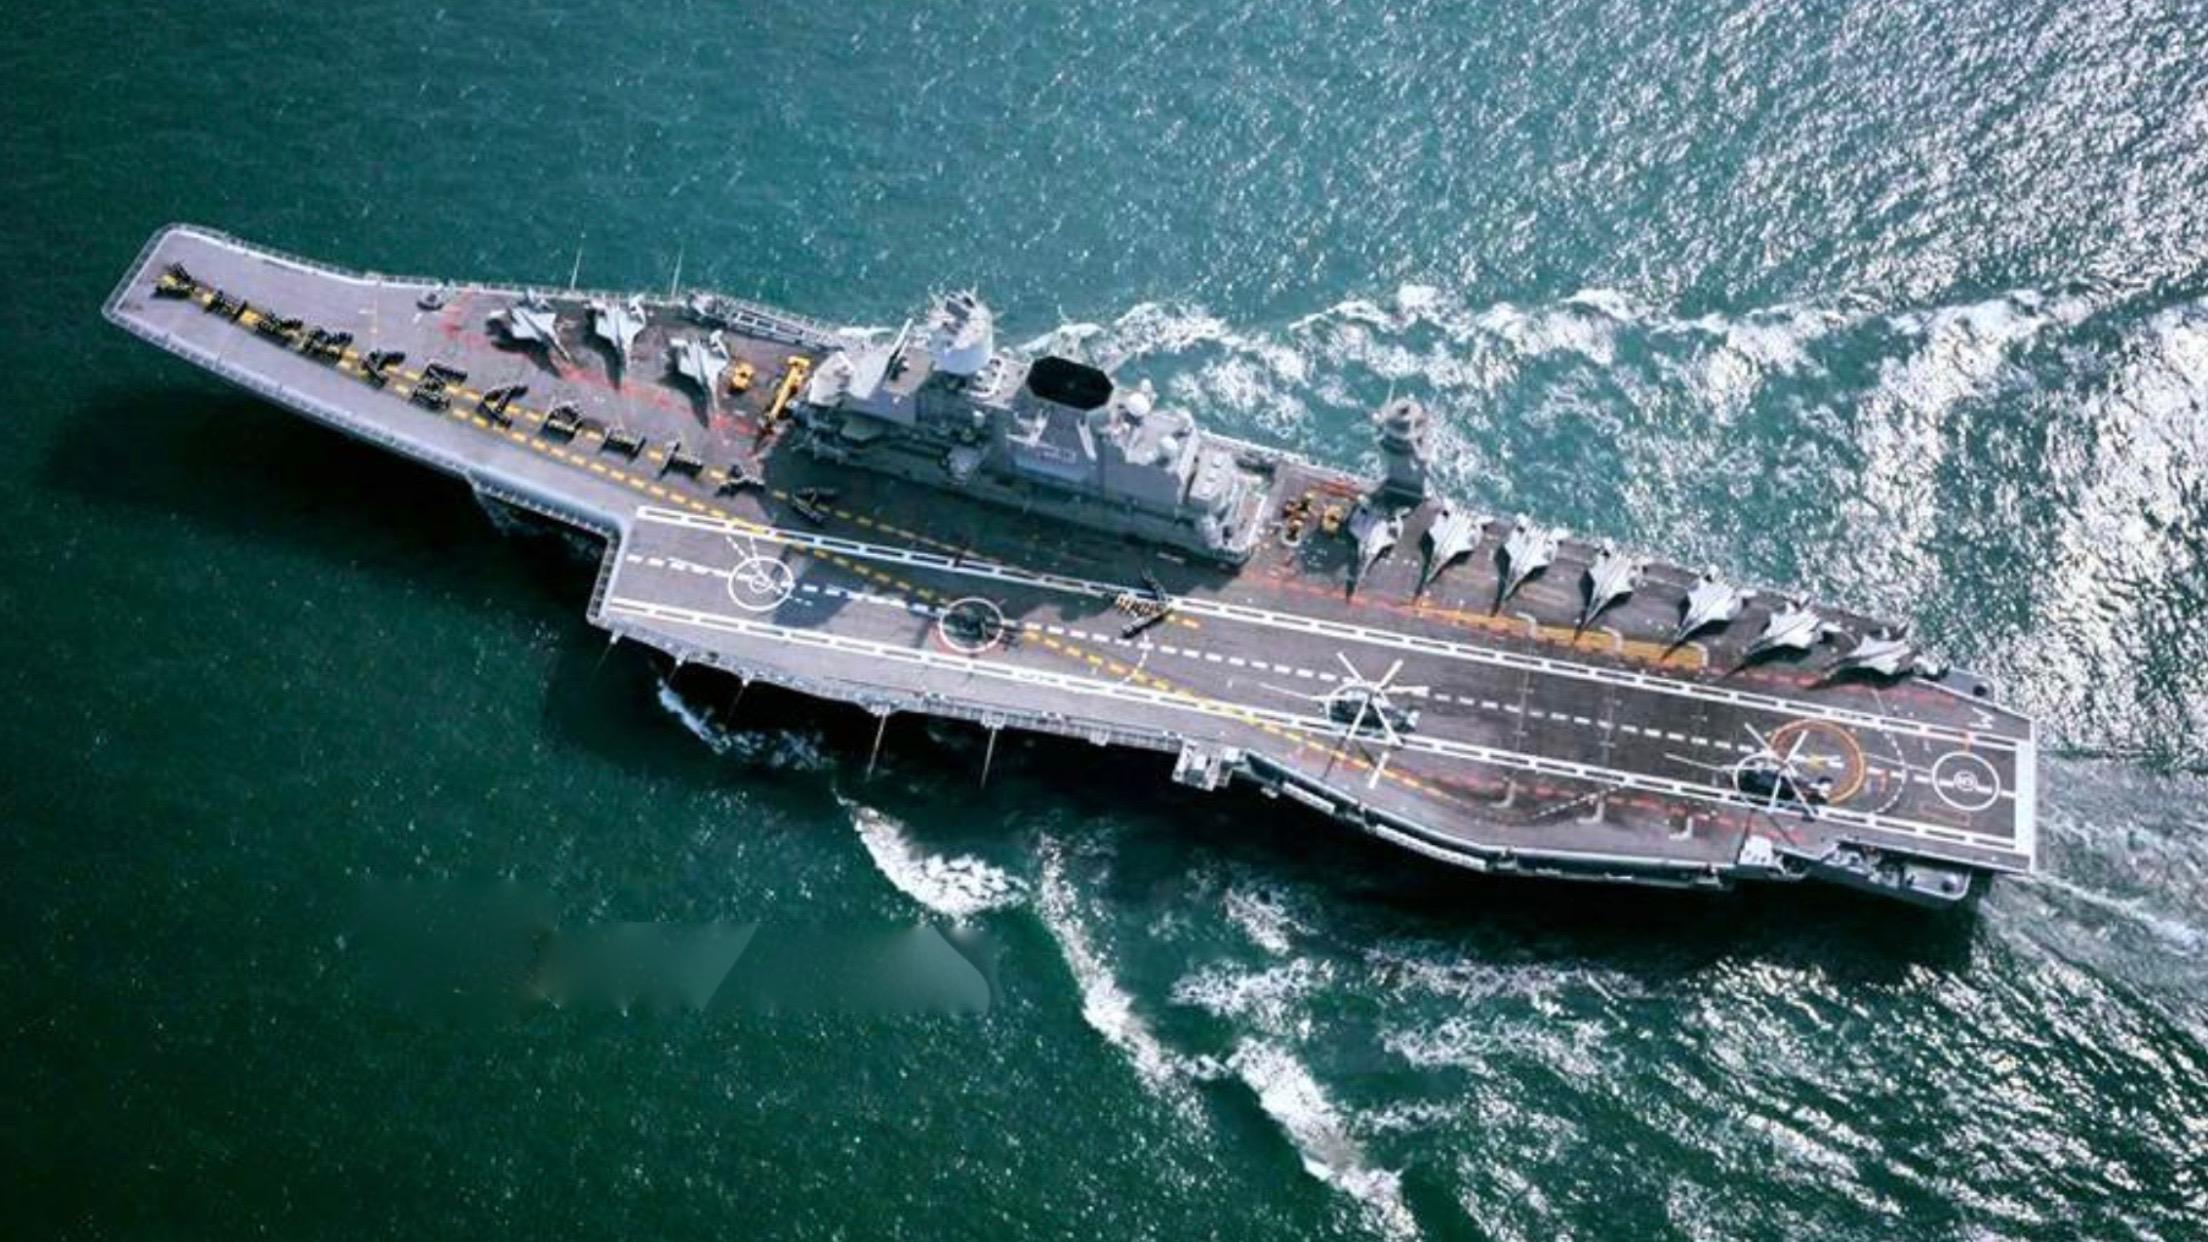 INS Vikramaditya; How Russia Extensively Modified a Soviet